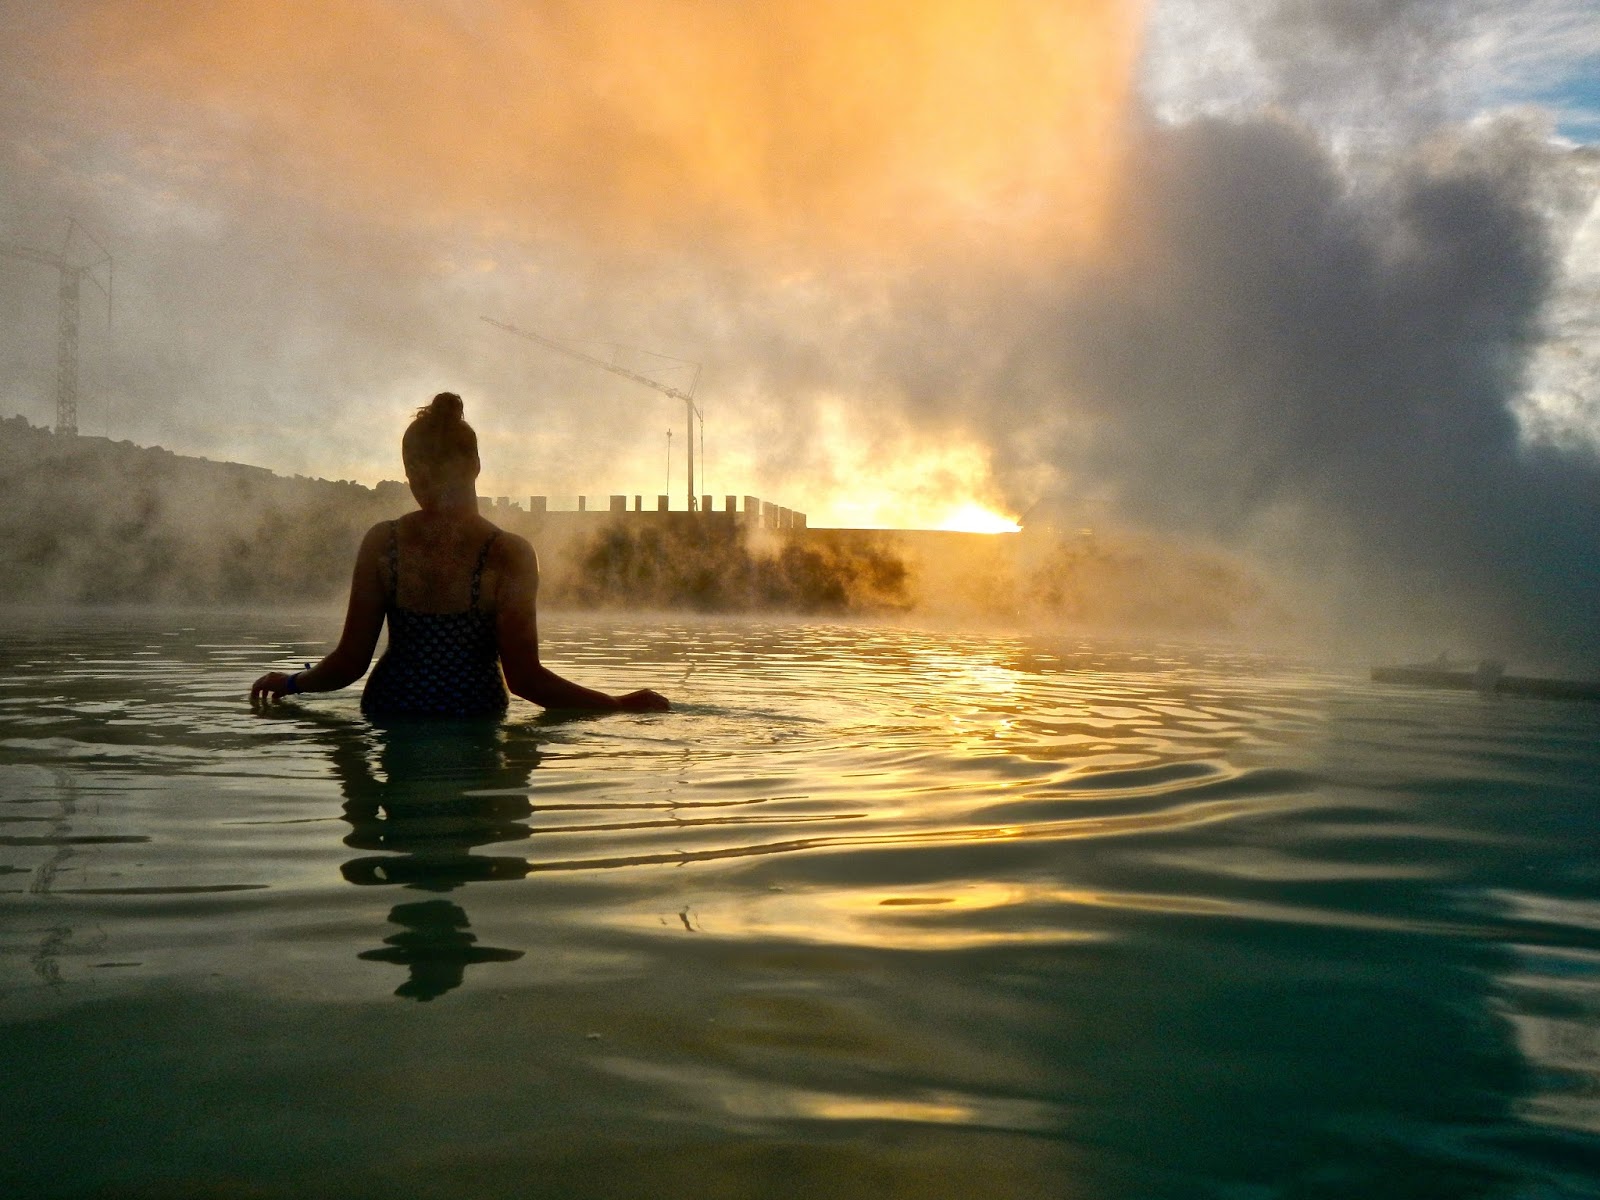 Things to do in Reykjavik Iceland : Take a sunset dip in the Blue Lagoon geothermal spa